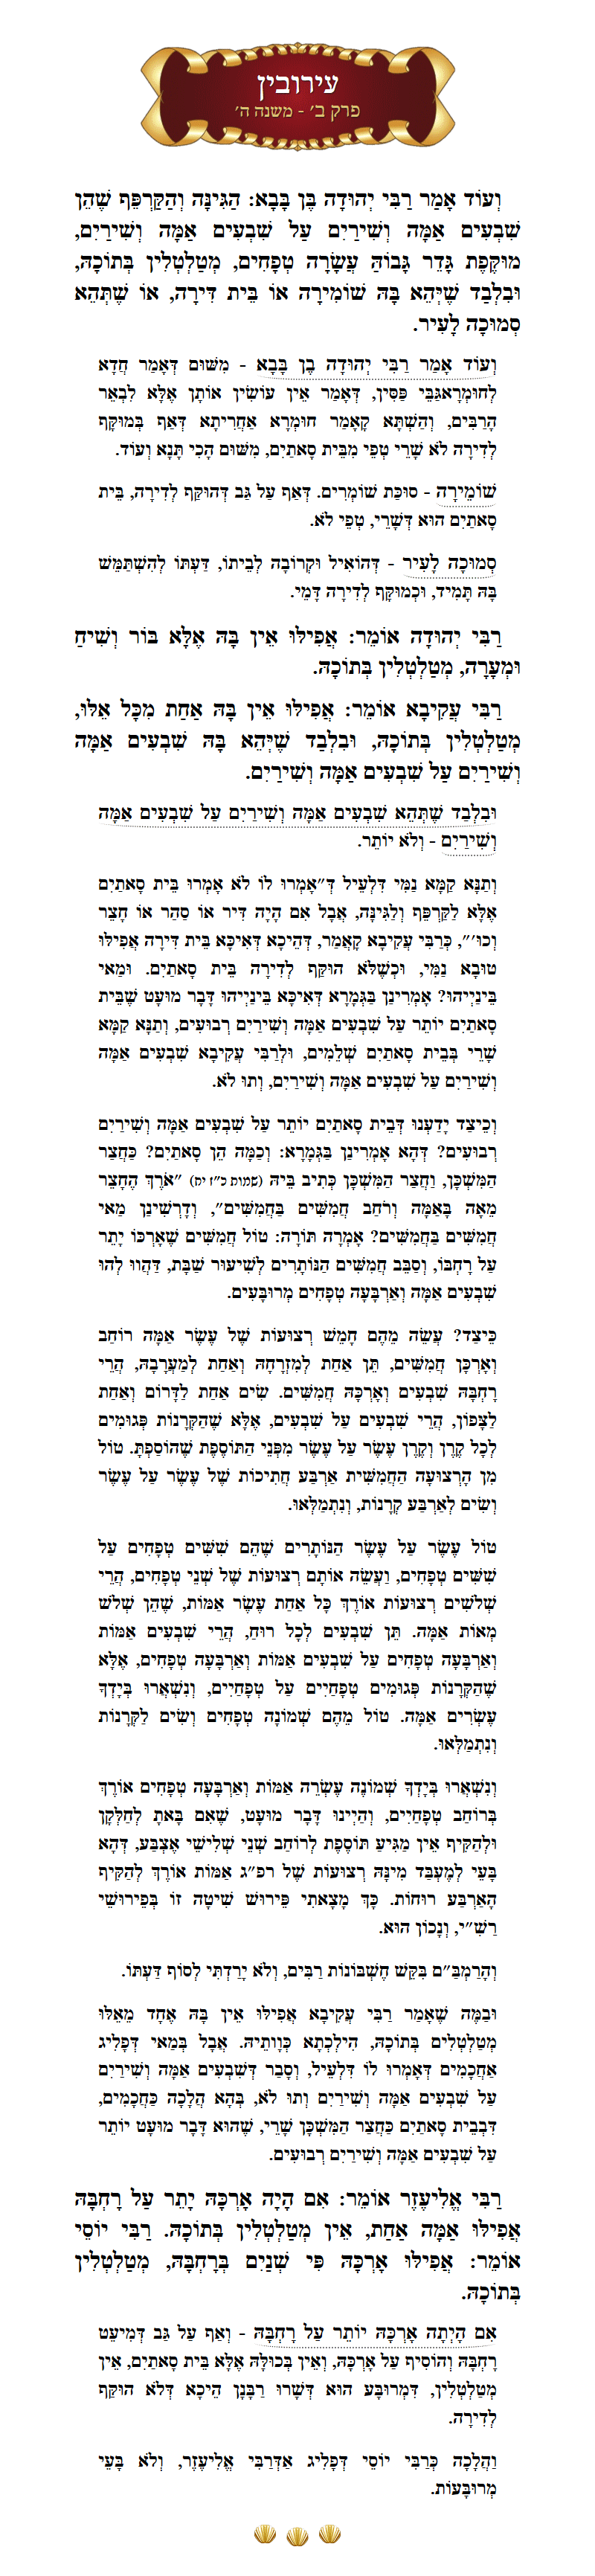 Masechta Eruvin Chapter 2 Mishnah 5 with commentary